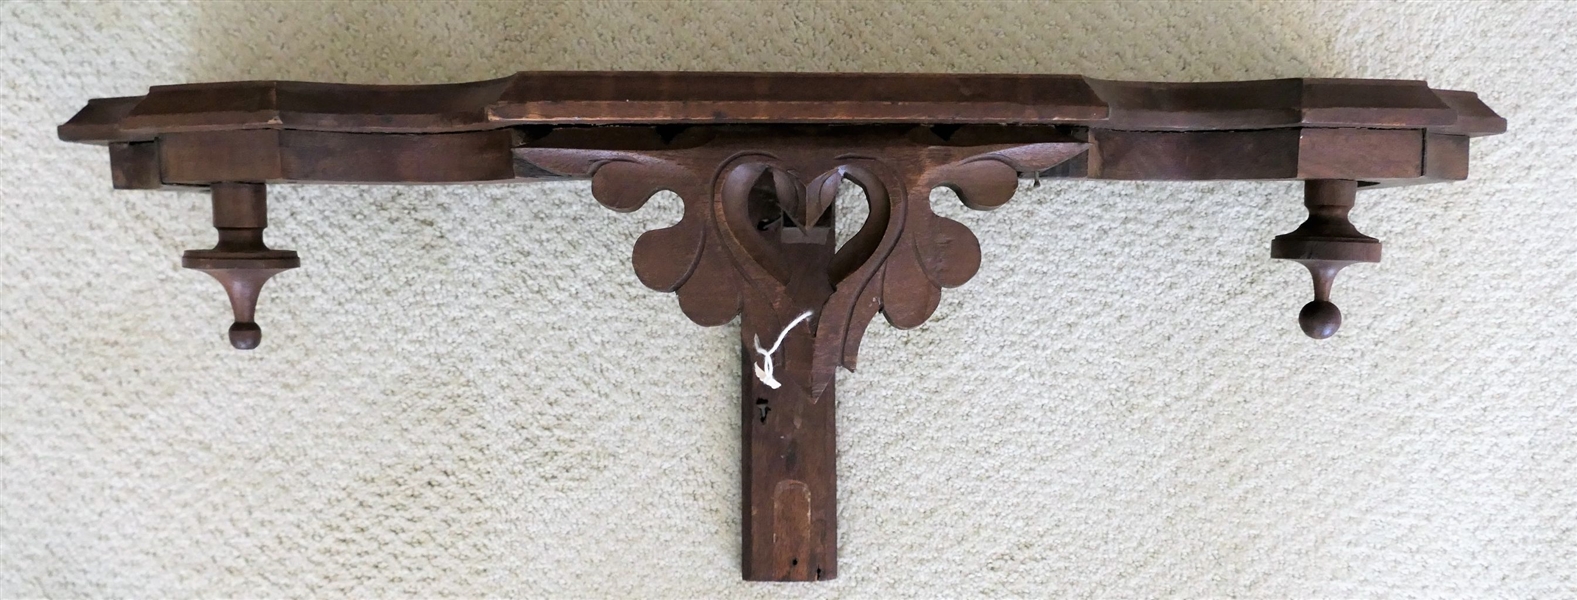 Walnut Shelf with Carved Heart and Leaves - Measures 28 1/2" by 8 1/2"